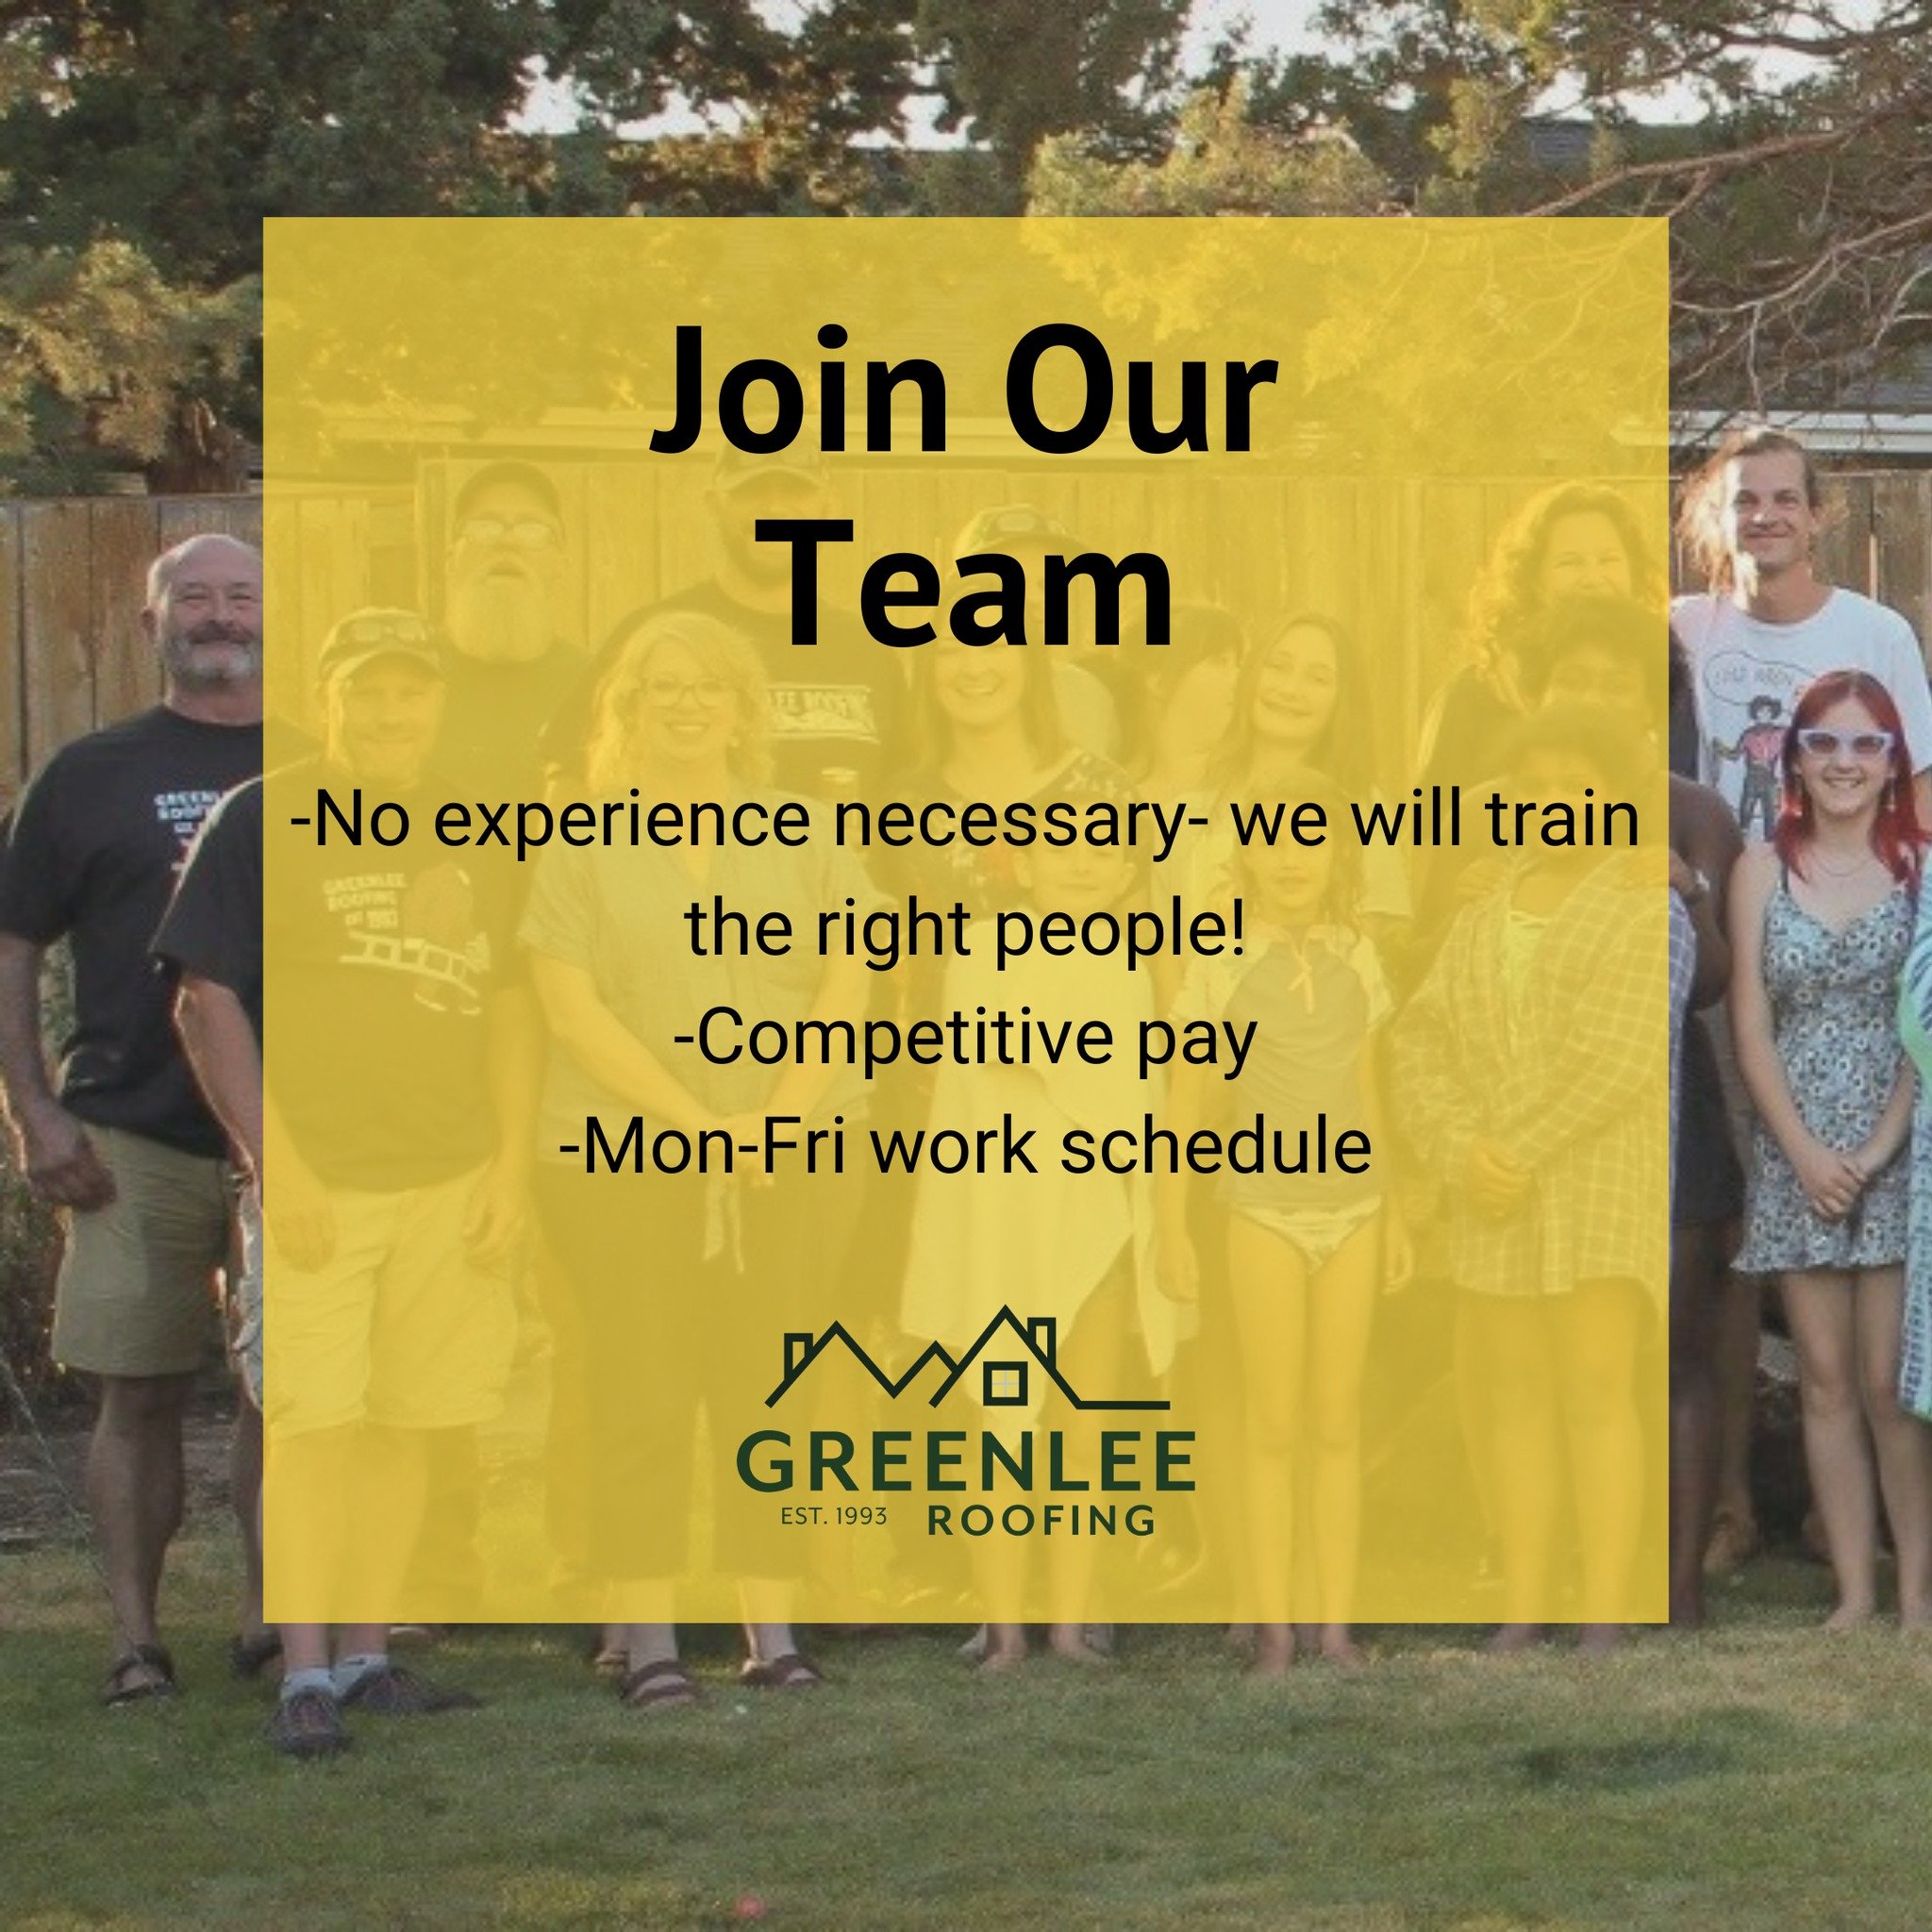 Learn more at: https://www.greenleeroofing.com/join-our-team